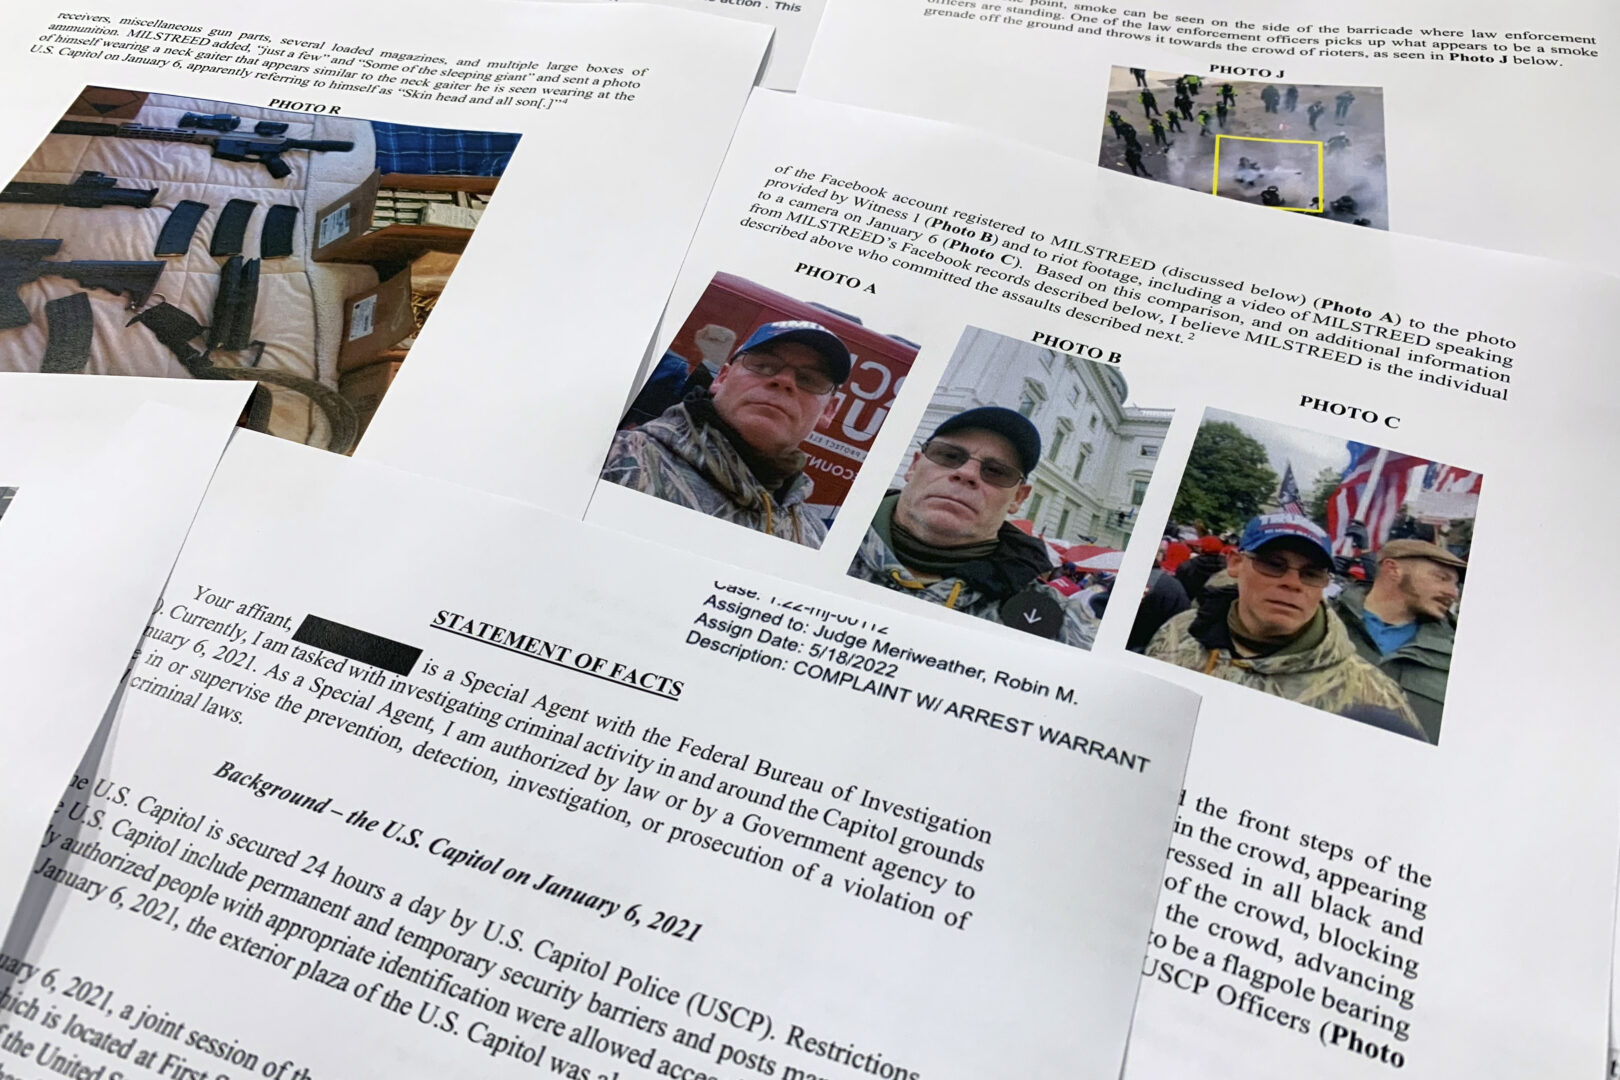 FILE - The statement of facts to support the arrest warrant for Rodney Milstreed of Finksburg, Md., is photographed Tuesday, May 24, 2022 in Washington. (AP Photo/Jon Elswick, File)